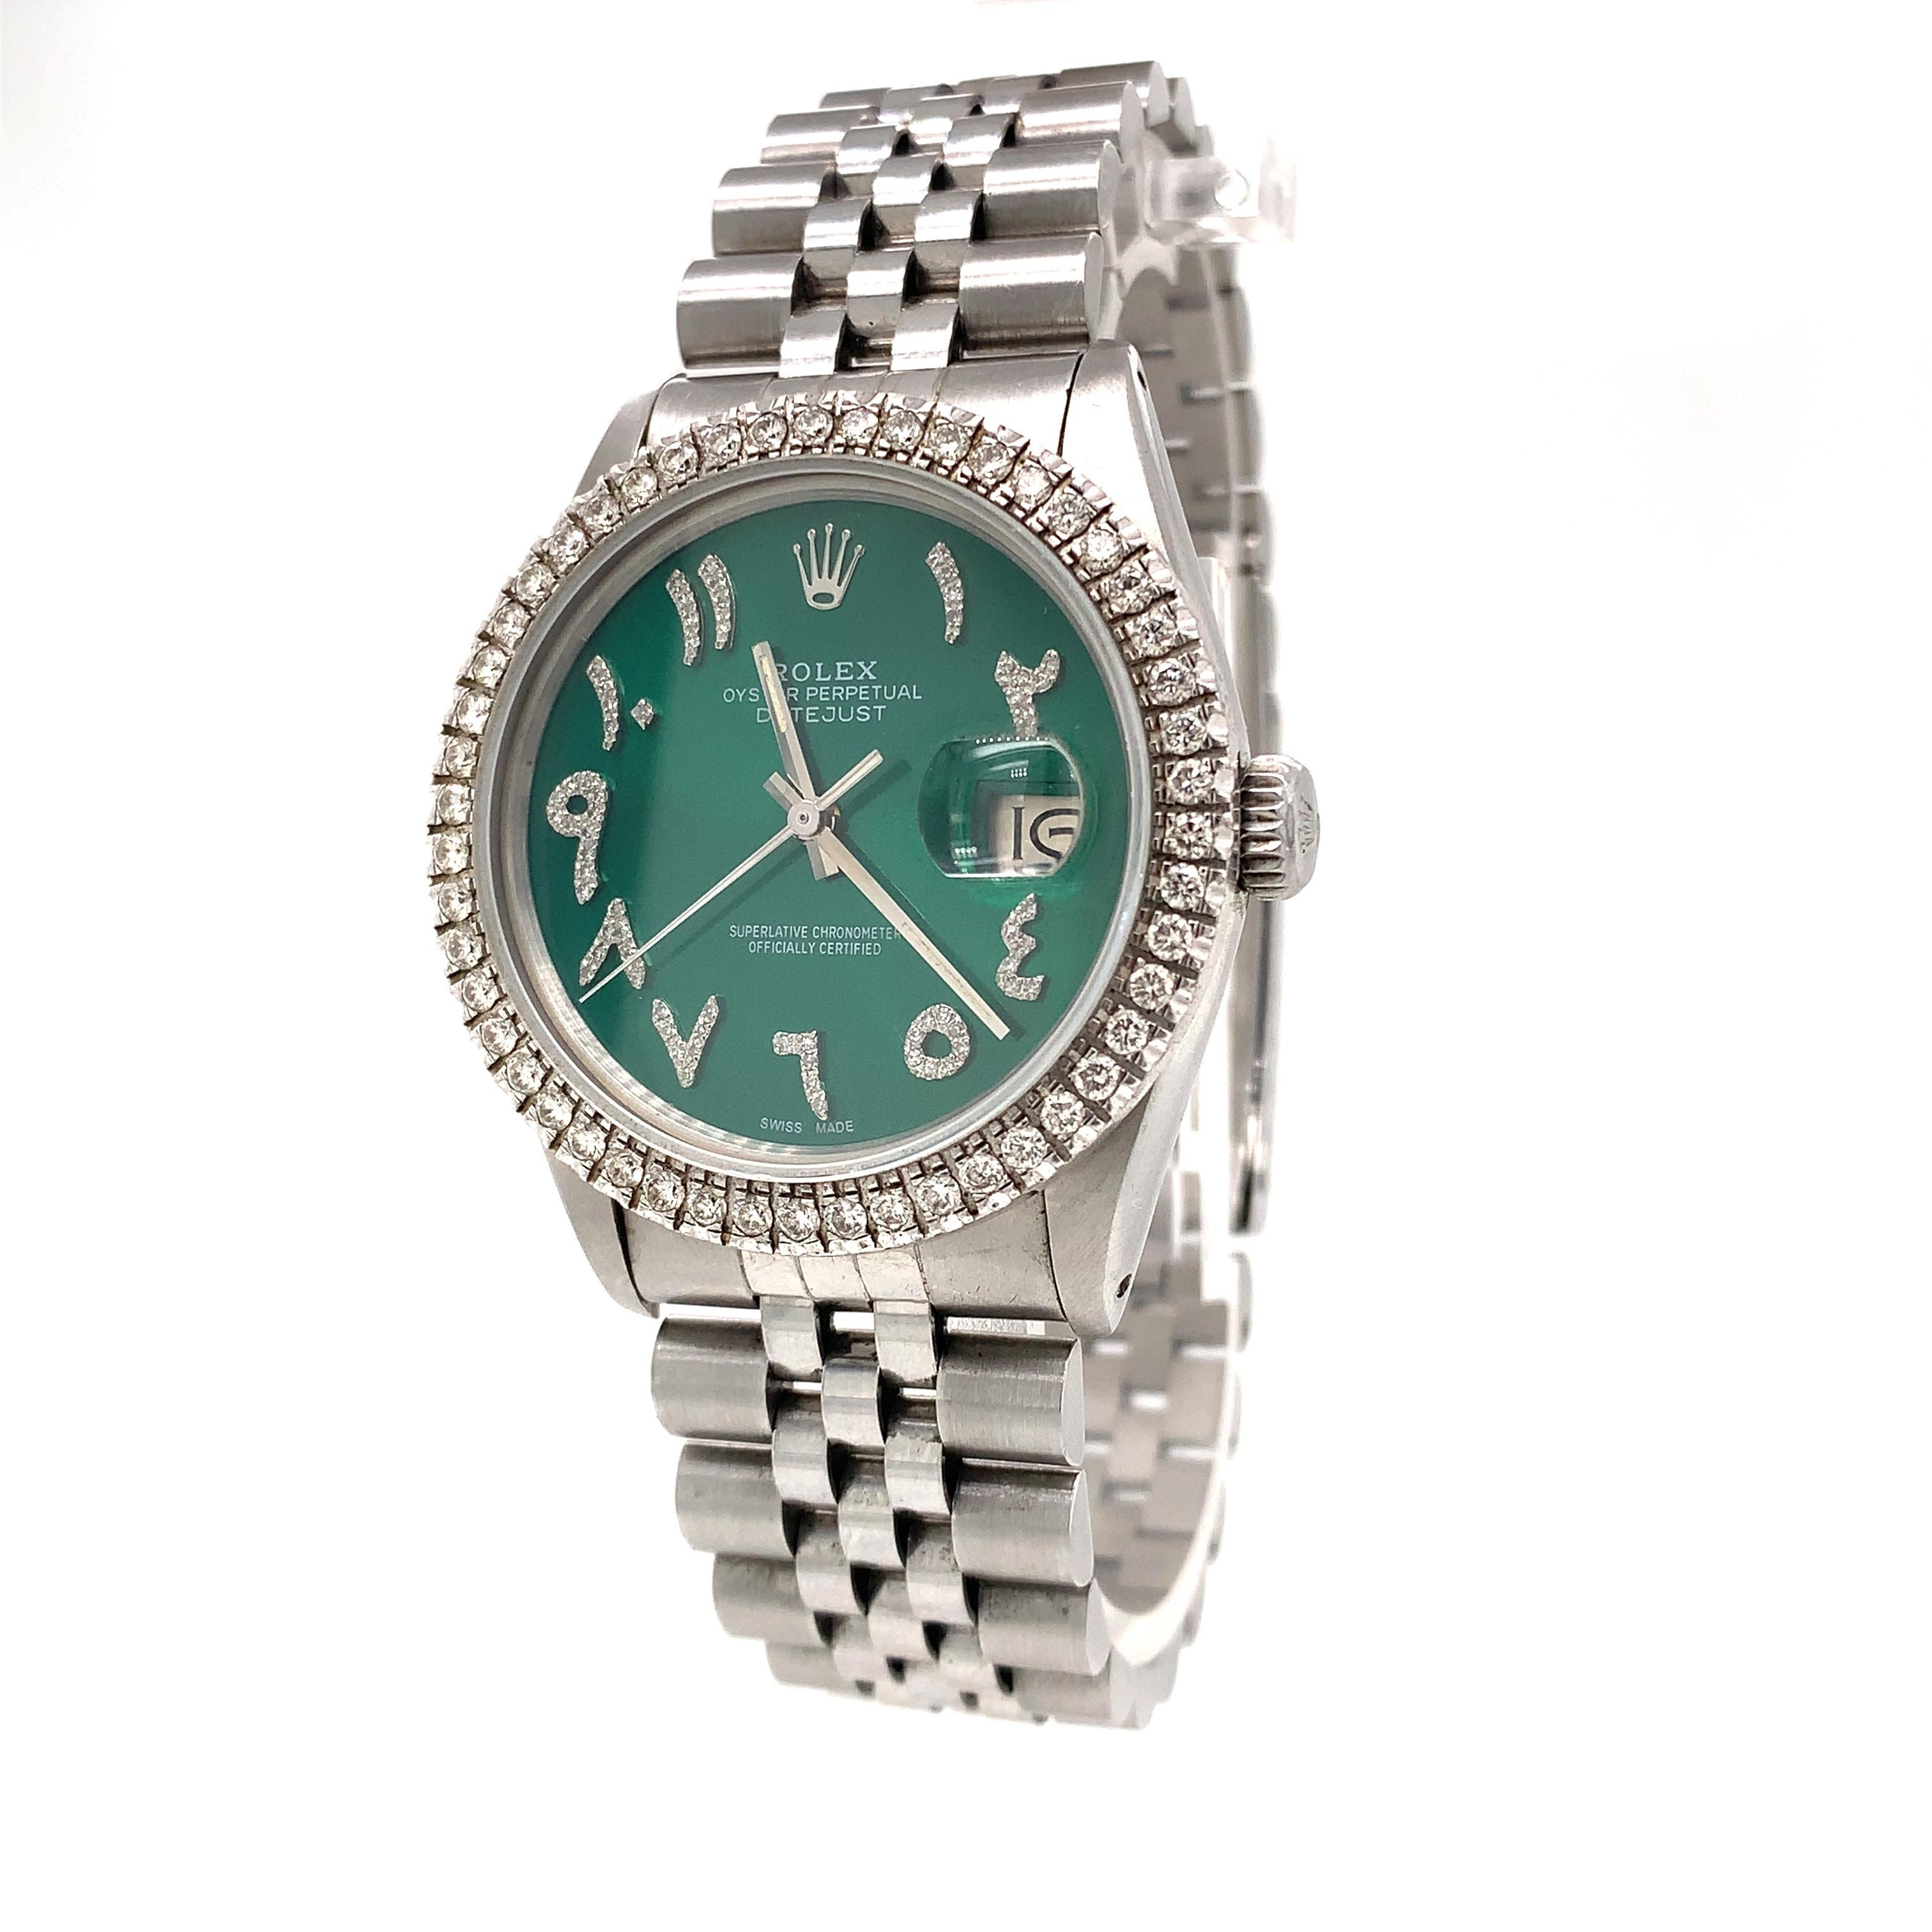 Rolex Datejust (16014) self-winding automatic watch features a 36mm stainless steel case with a diamond bezel surrounding a arabic diamond dial on stainless steel and an stainless steel Jubilee bracelet with a folding buckle. Functions include hours